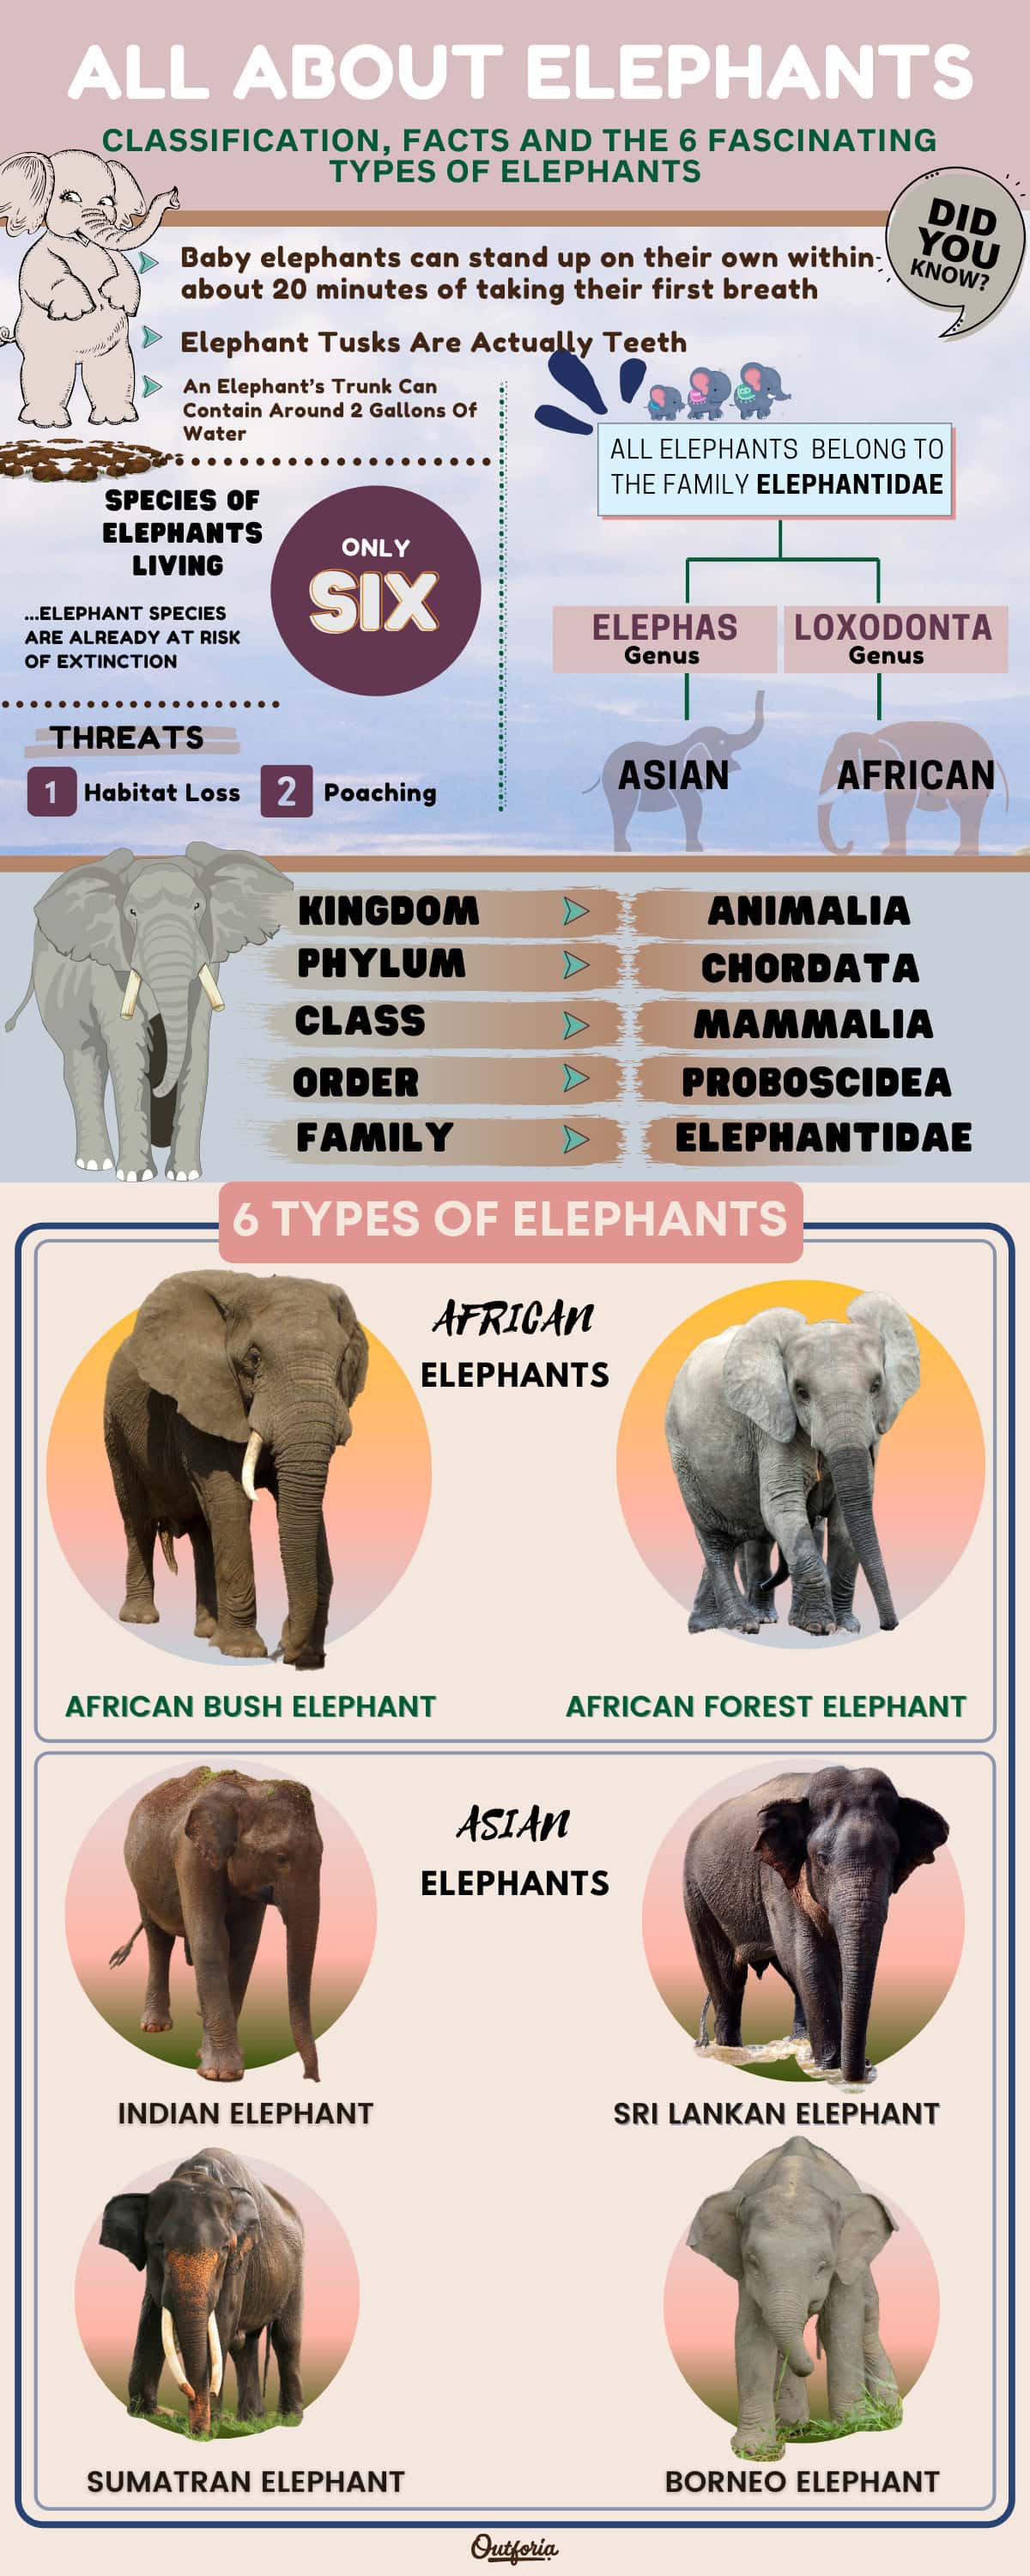 The 6 Different Types of Elephants + Facts, Photos, & Identification -  Outforia